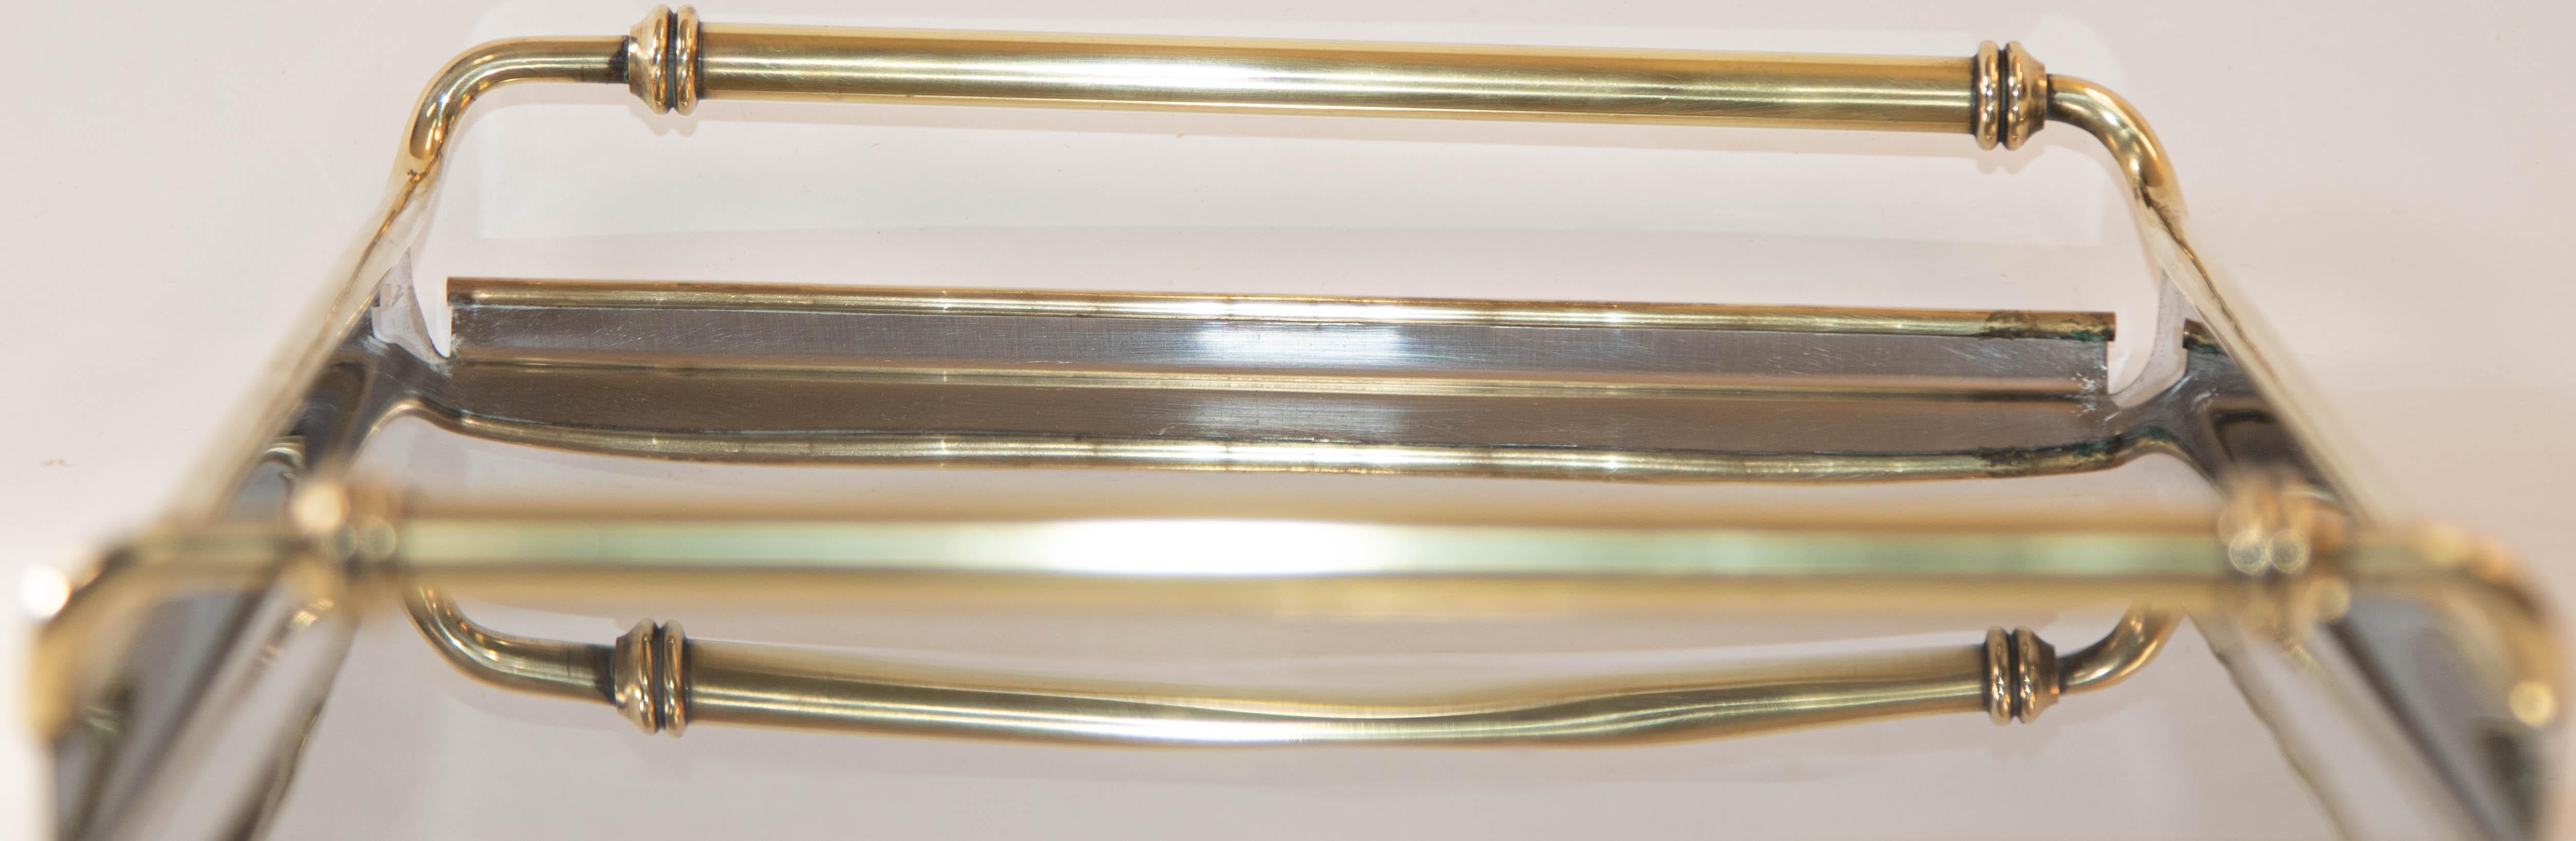 1950s Art Deco Metal Tray Chrome Mirrored with Brass Handles 3